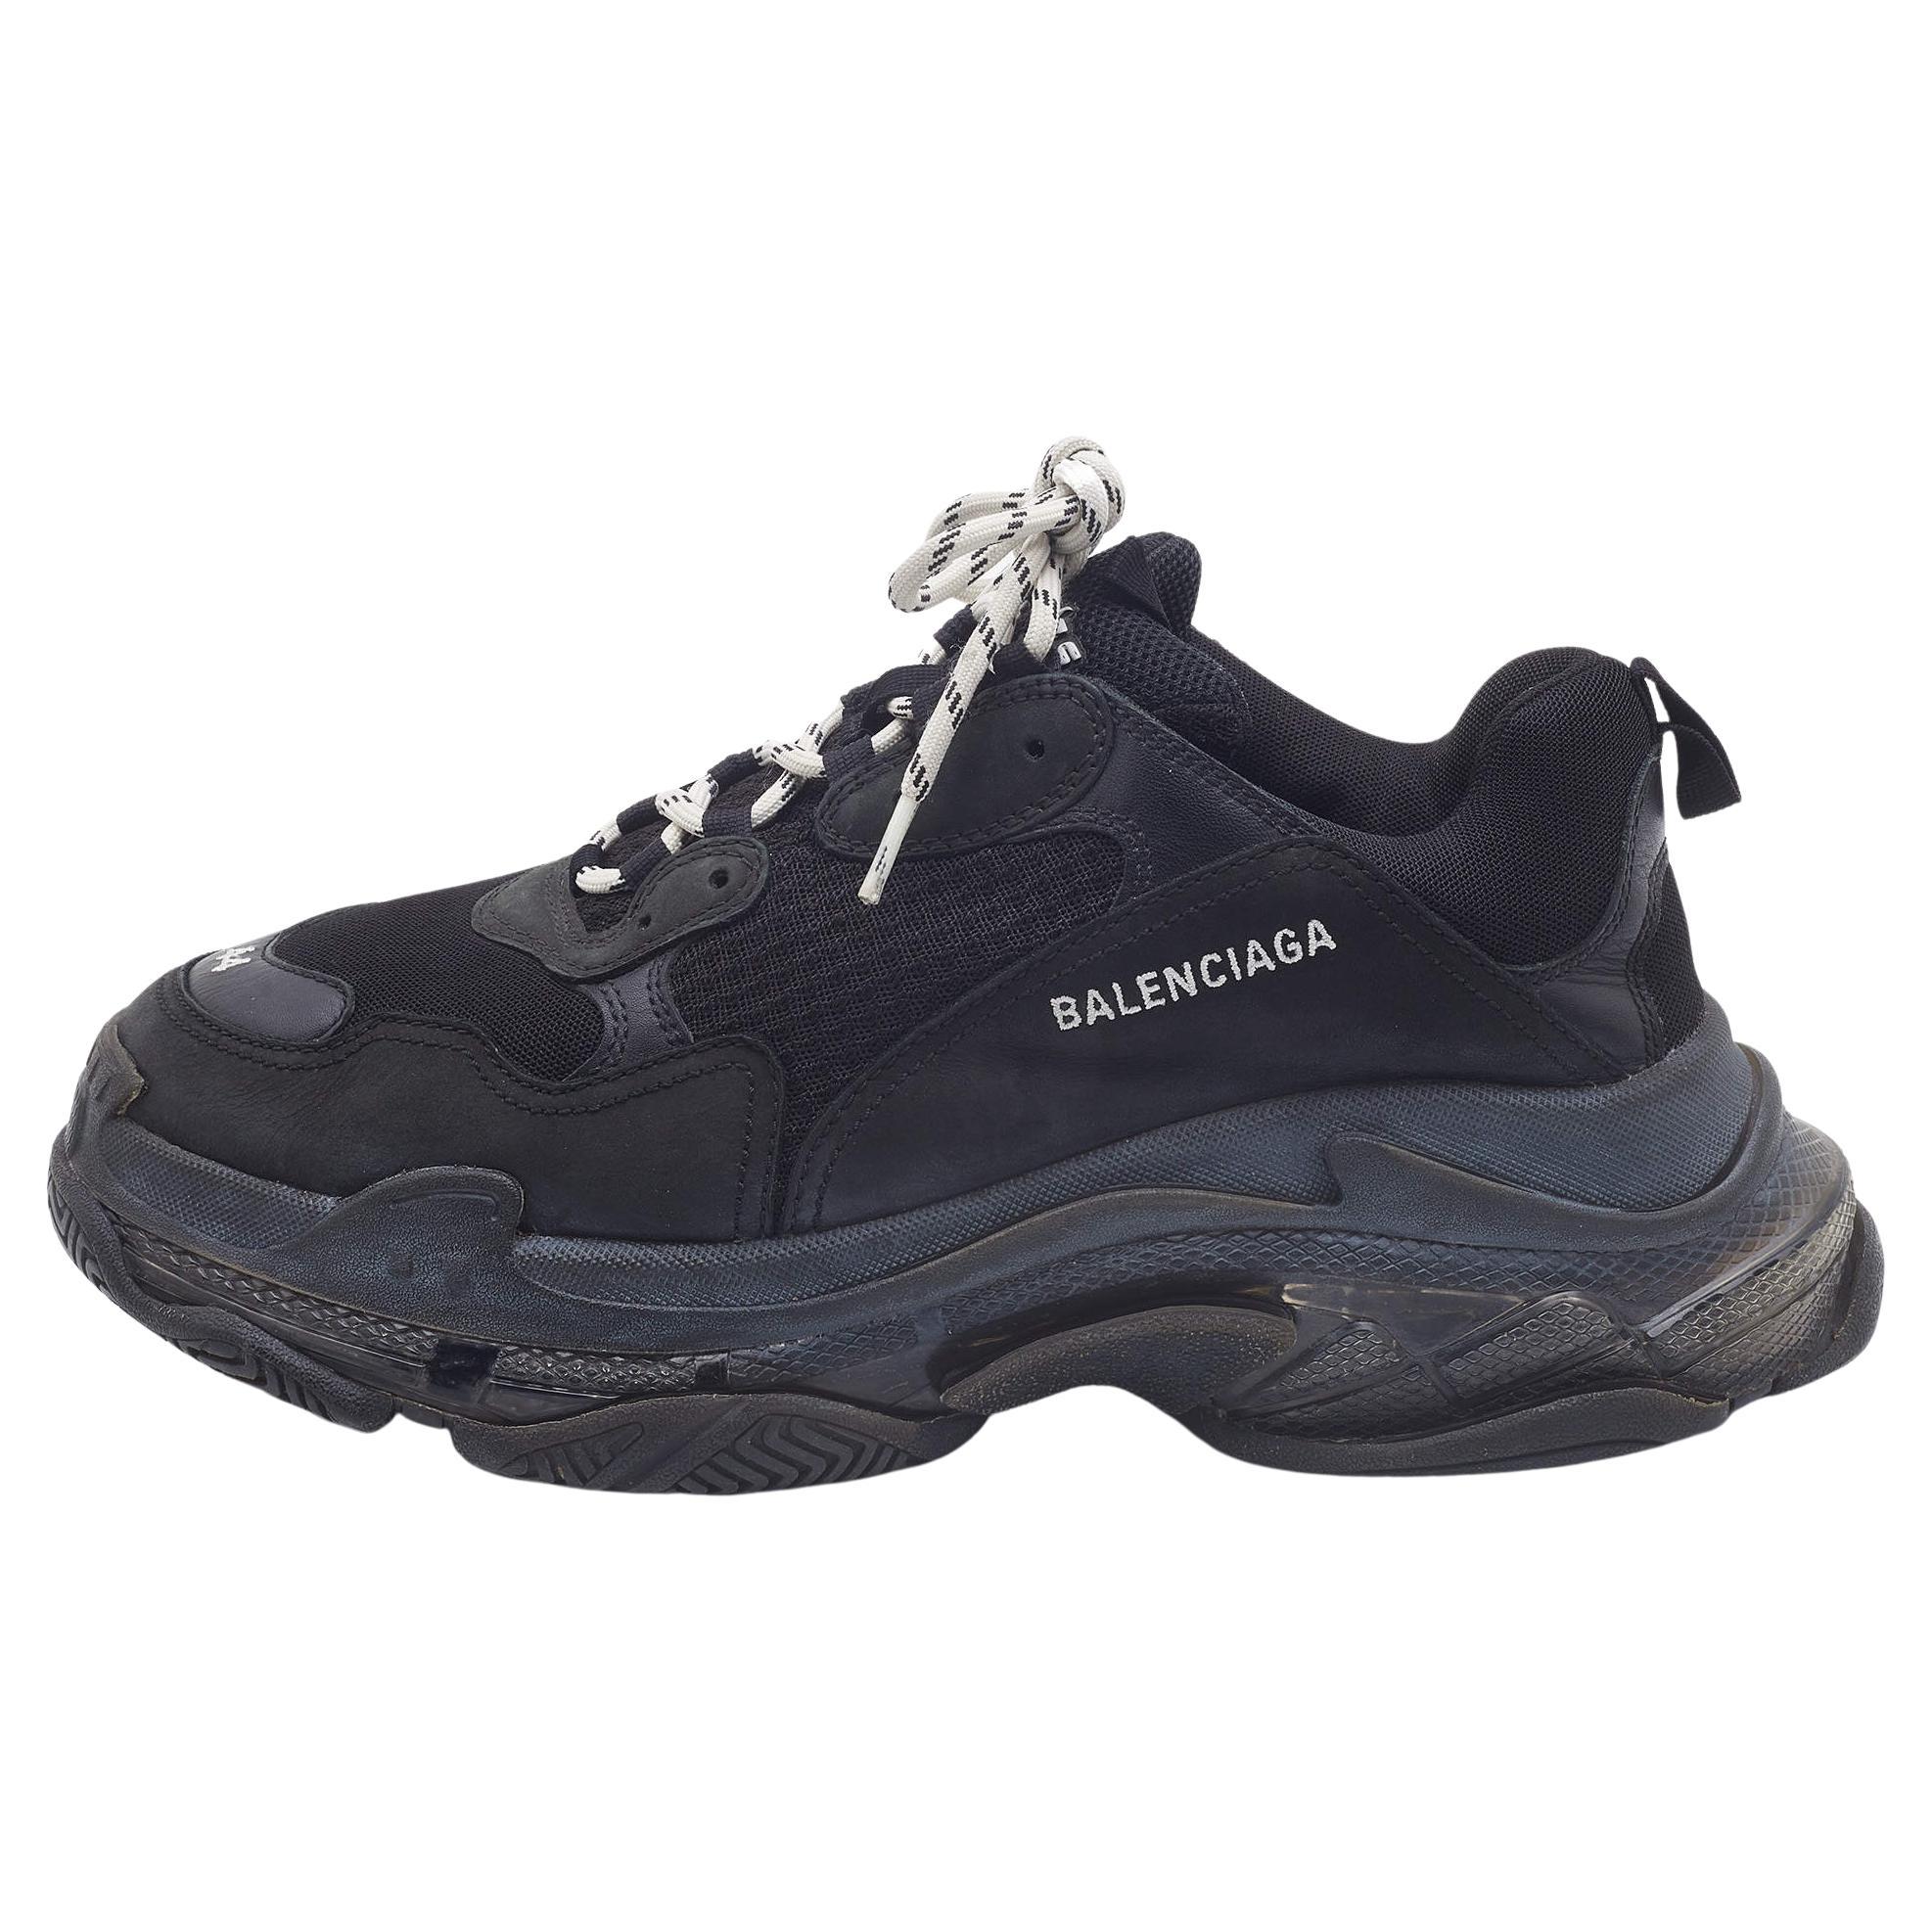 Balenciaga Black Mesh Suede and Leather Triple S Sneakers Size 44